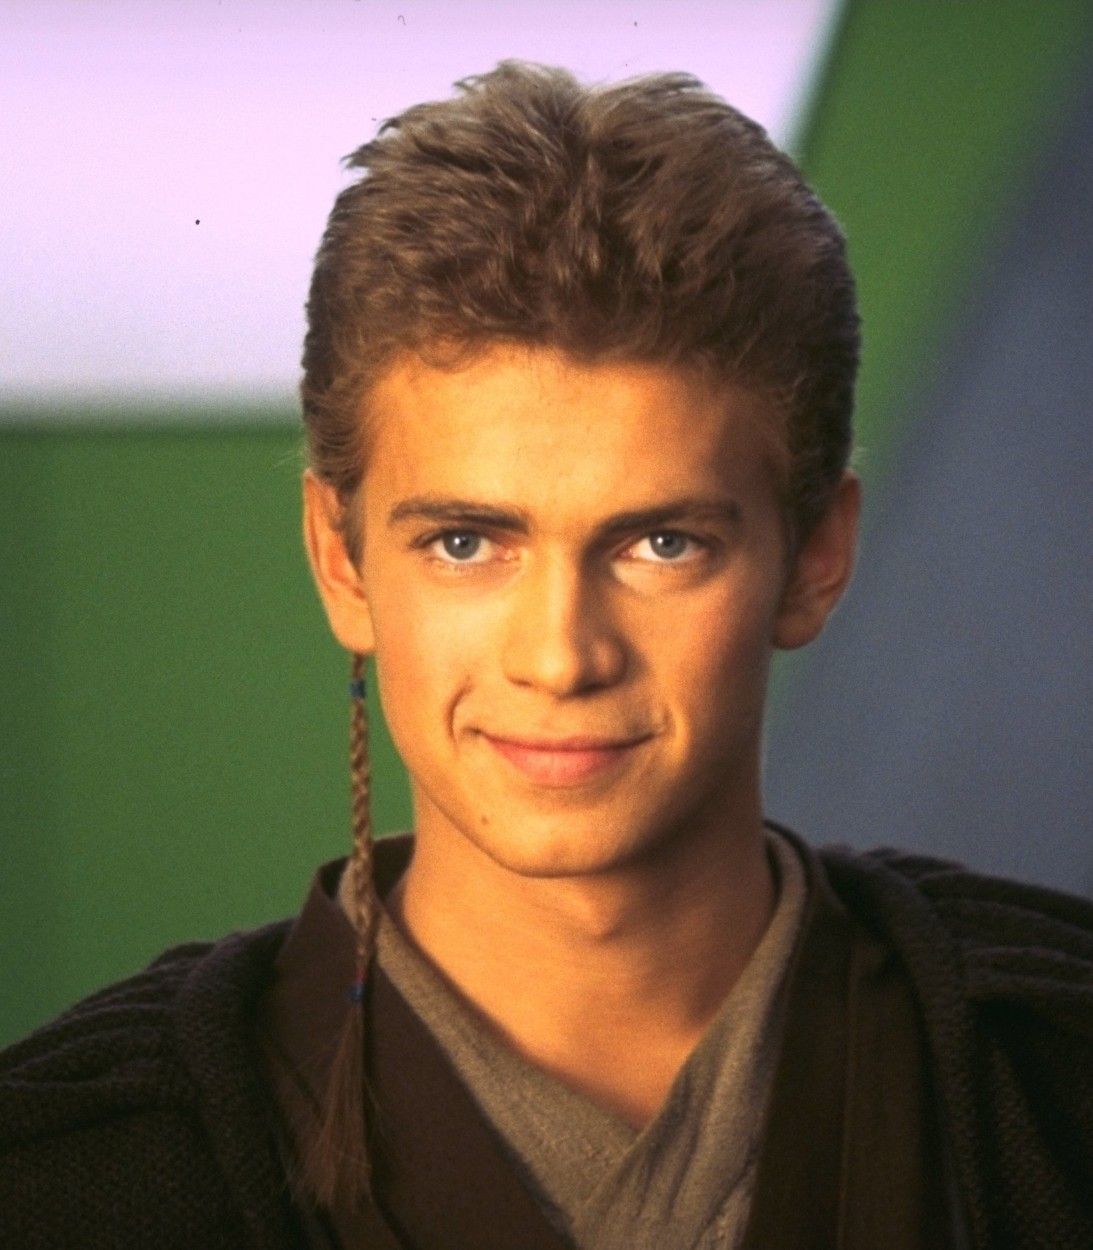 Star Wars Attack of the Clones Anakin vertical